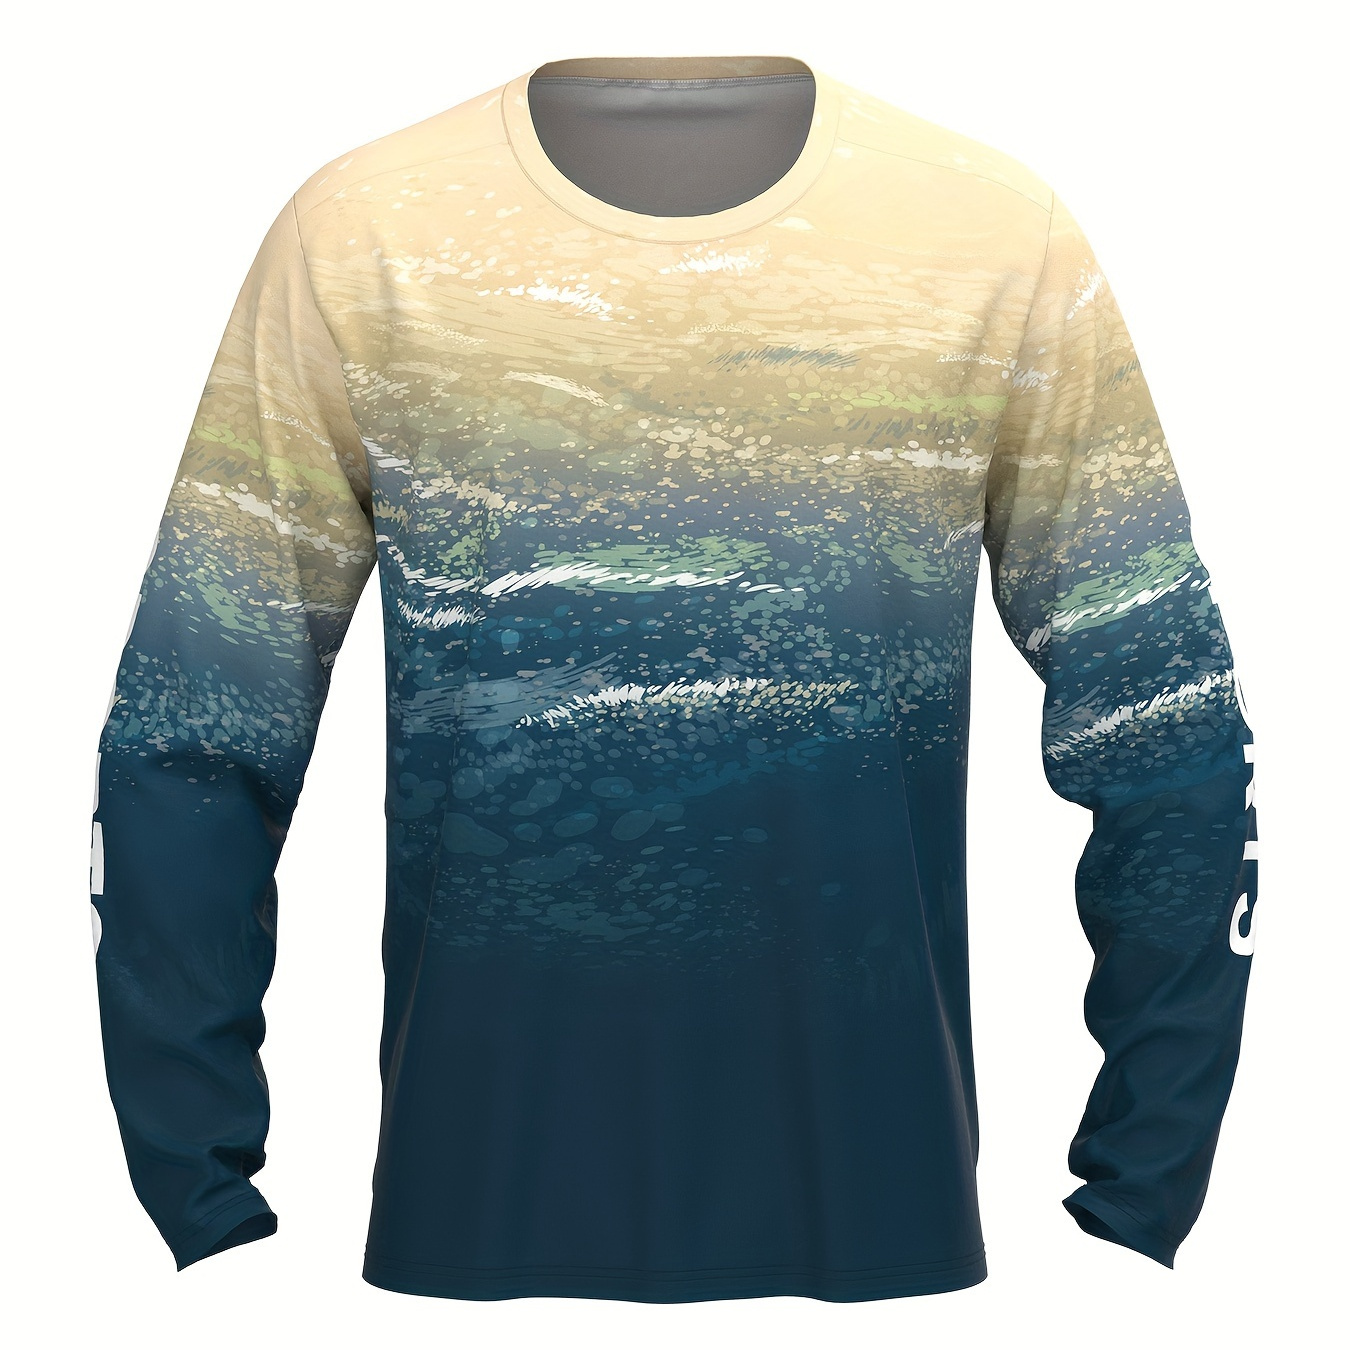 

Men's Sea Graphic Print Sun Protection Shirt, Quick Dry Long Sleeve Crew Neck Rash Guard For Fishing Hiking Outdoor